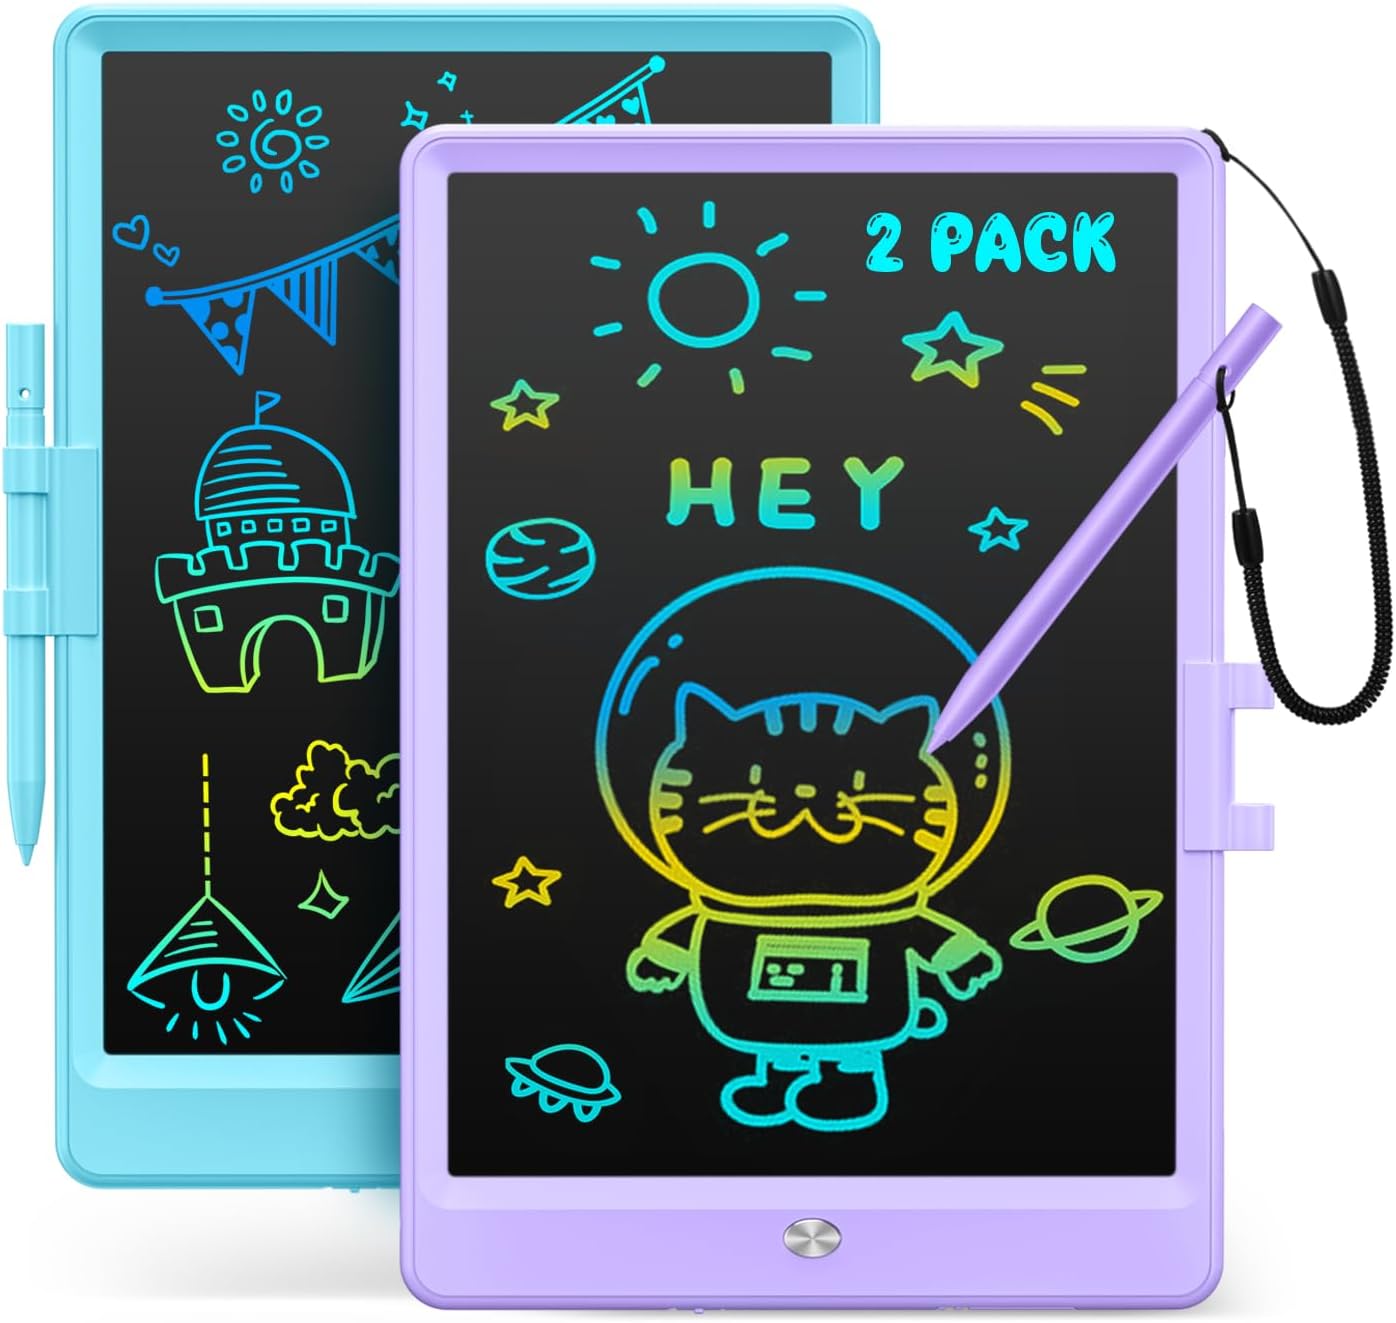 Kidopire LCD Writing Tablet for Kids, Reusable Doodle Board, 2Pack Drawing Tablet Drawing Pad for Kids with String, Educational Toddler Kids Travel Toys, Birthday Gifts for 3 4 5 6 Year Old Girls Boys